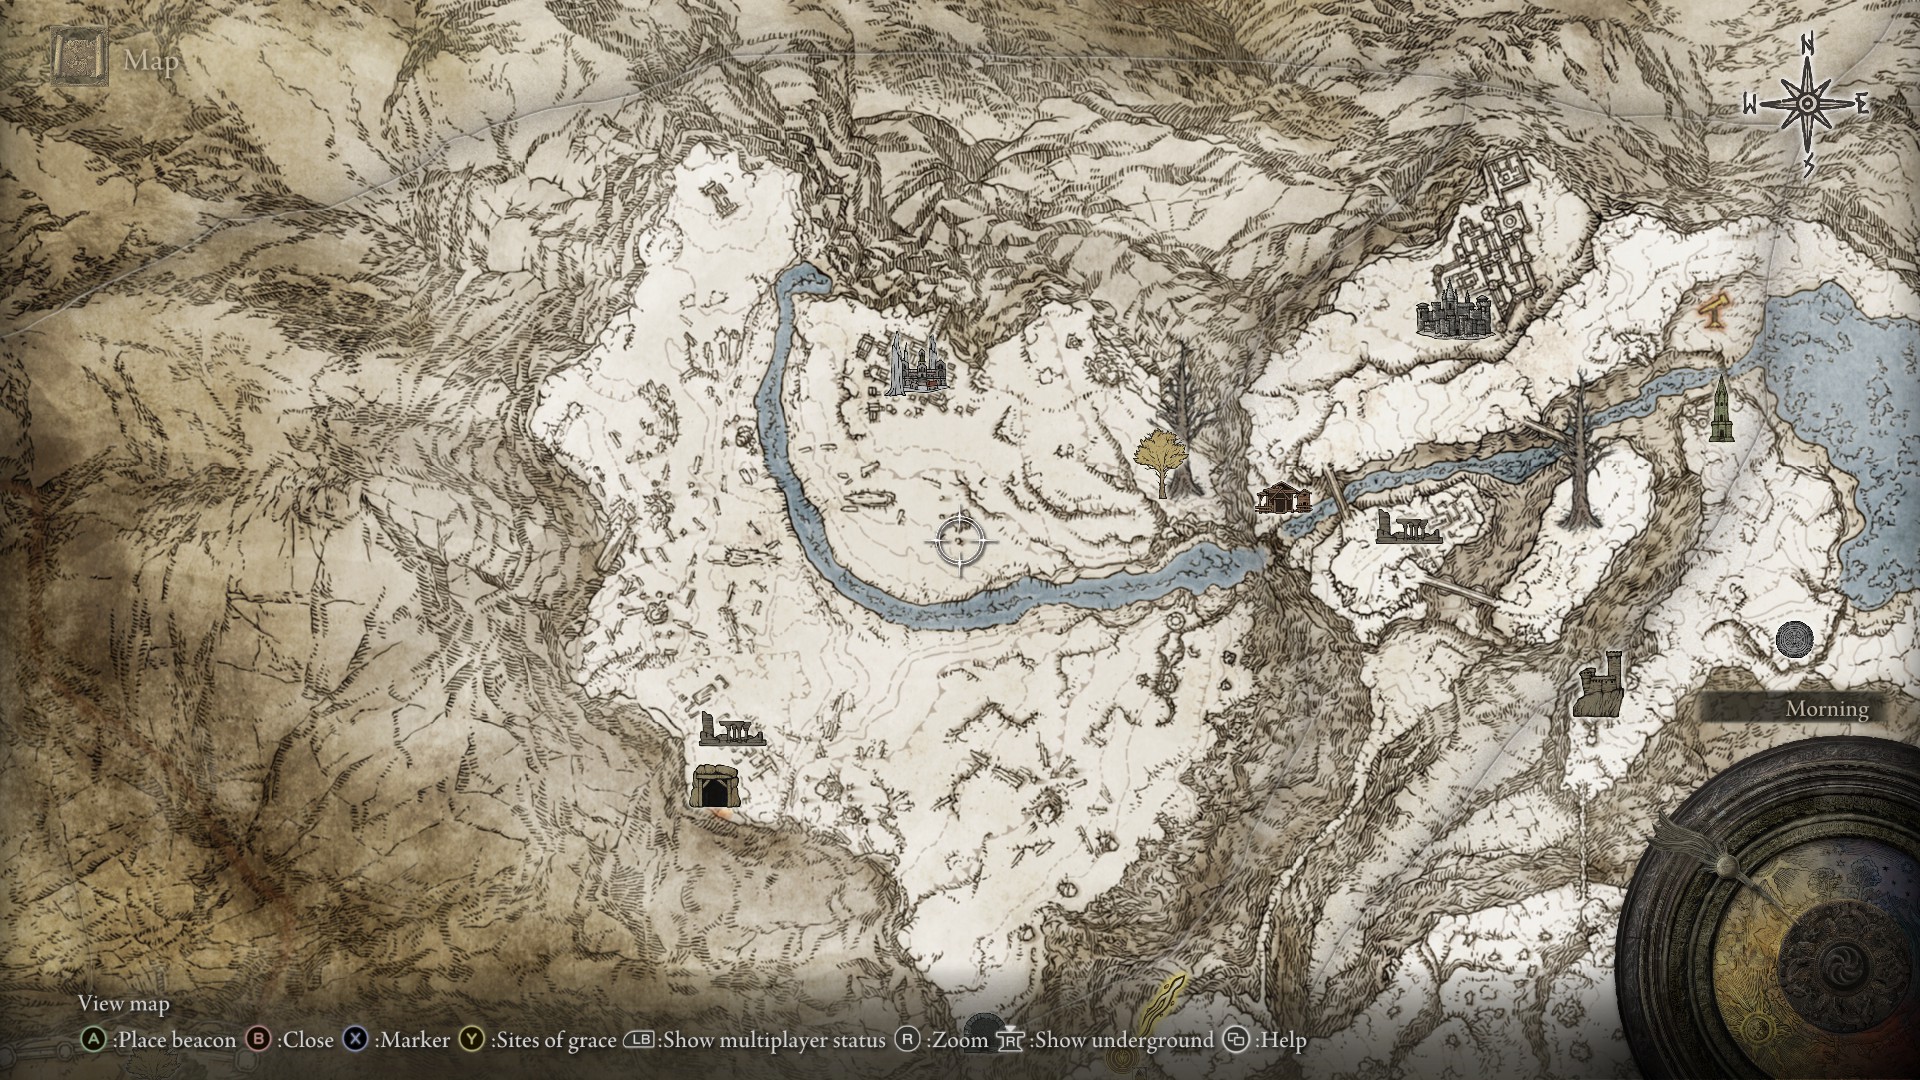 Elden Ring map fragment for the Consecrated Snowfield